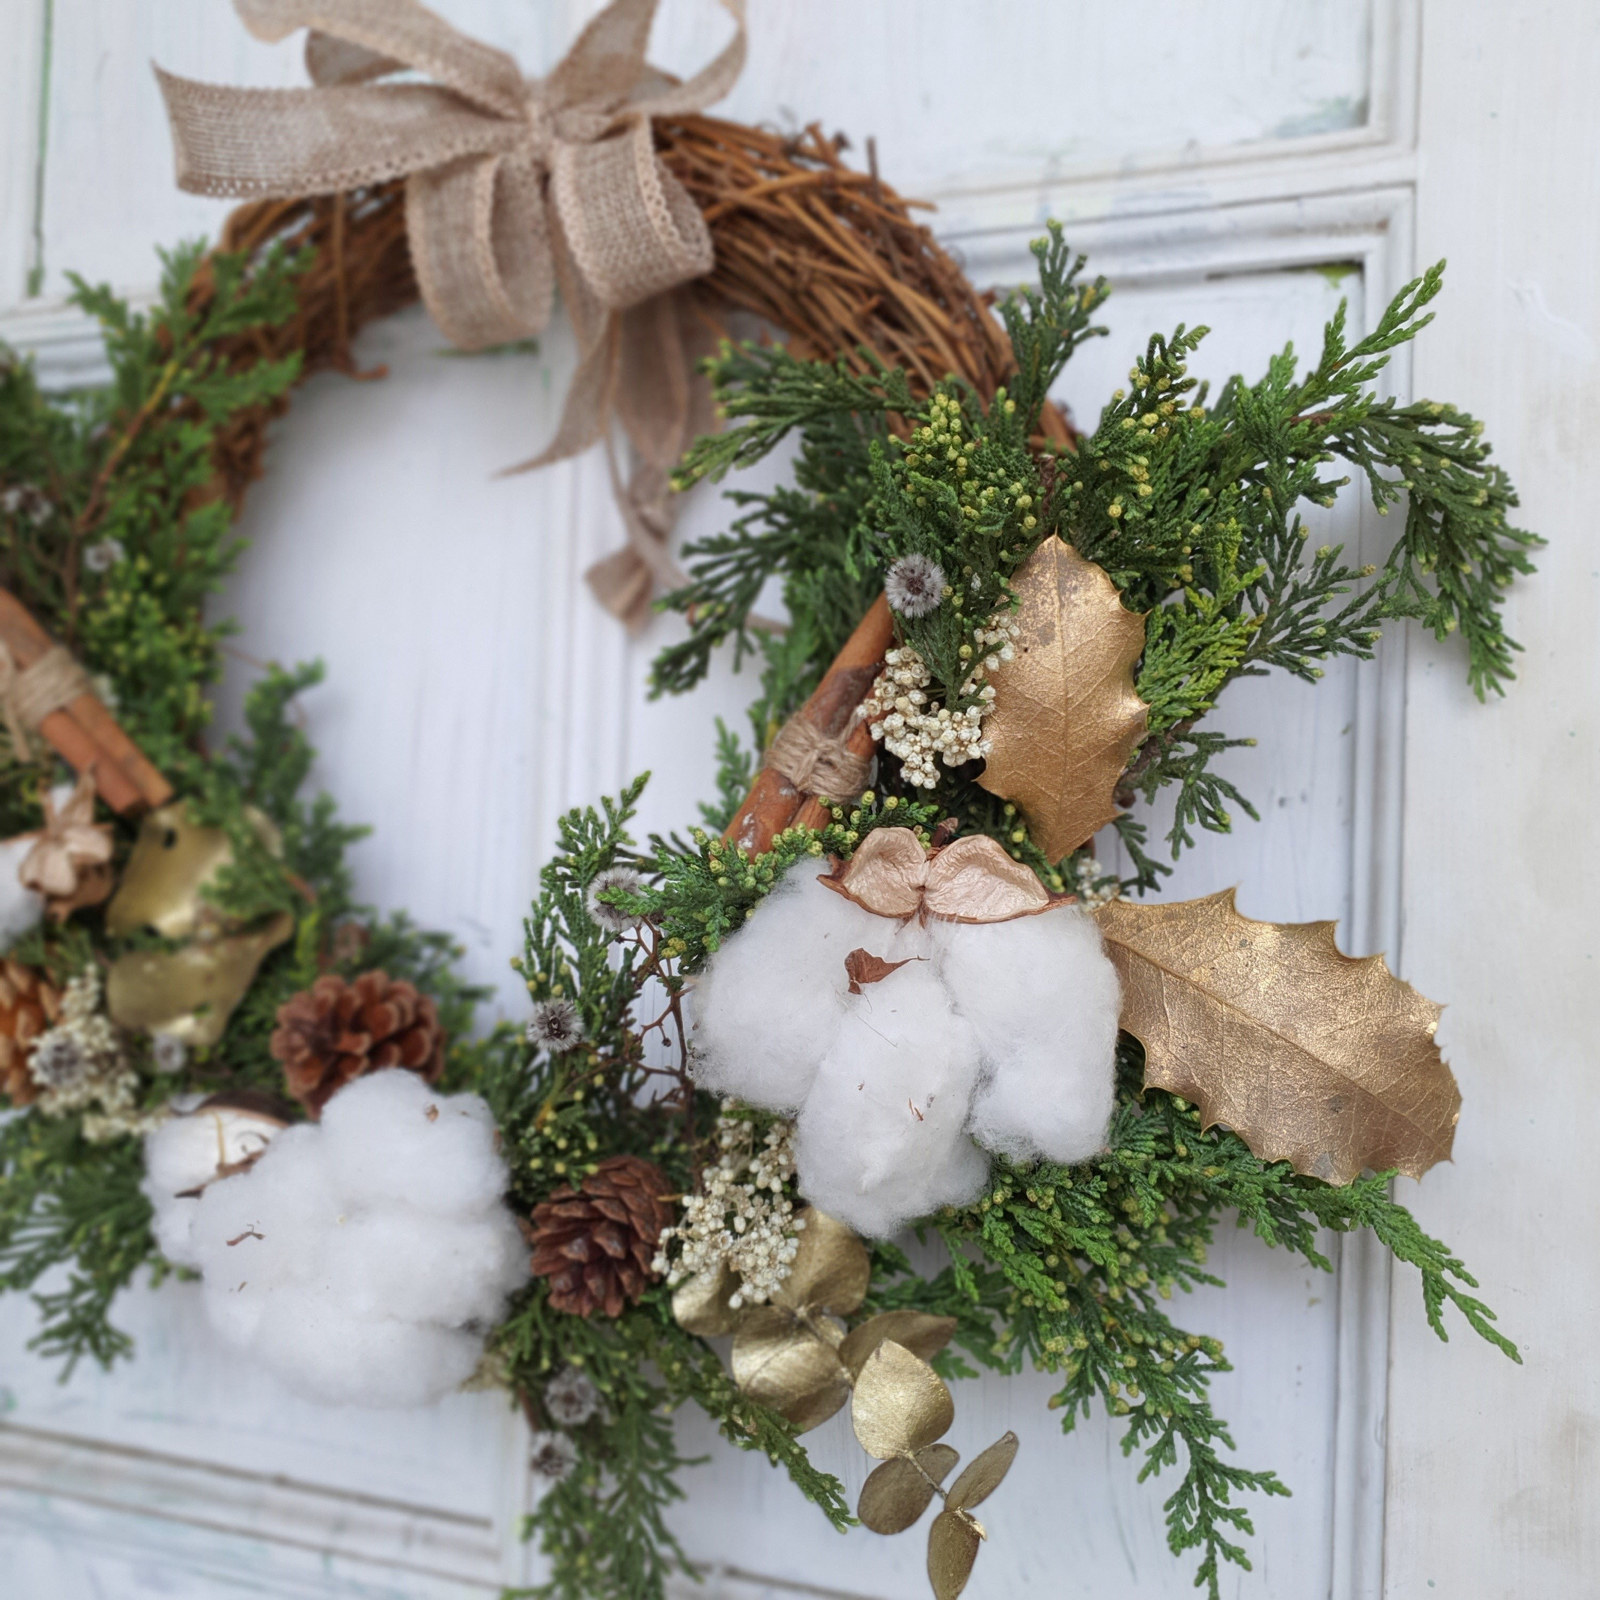 Wreath-making workshop by Flower Lane & Co. as part of 'Festive workshops at Vaucluse House'